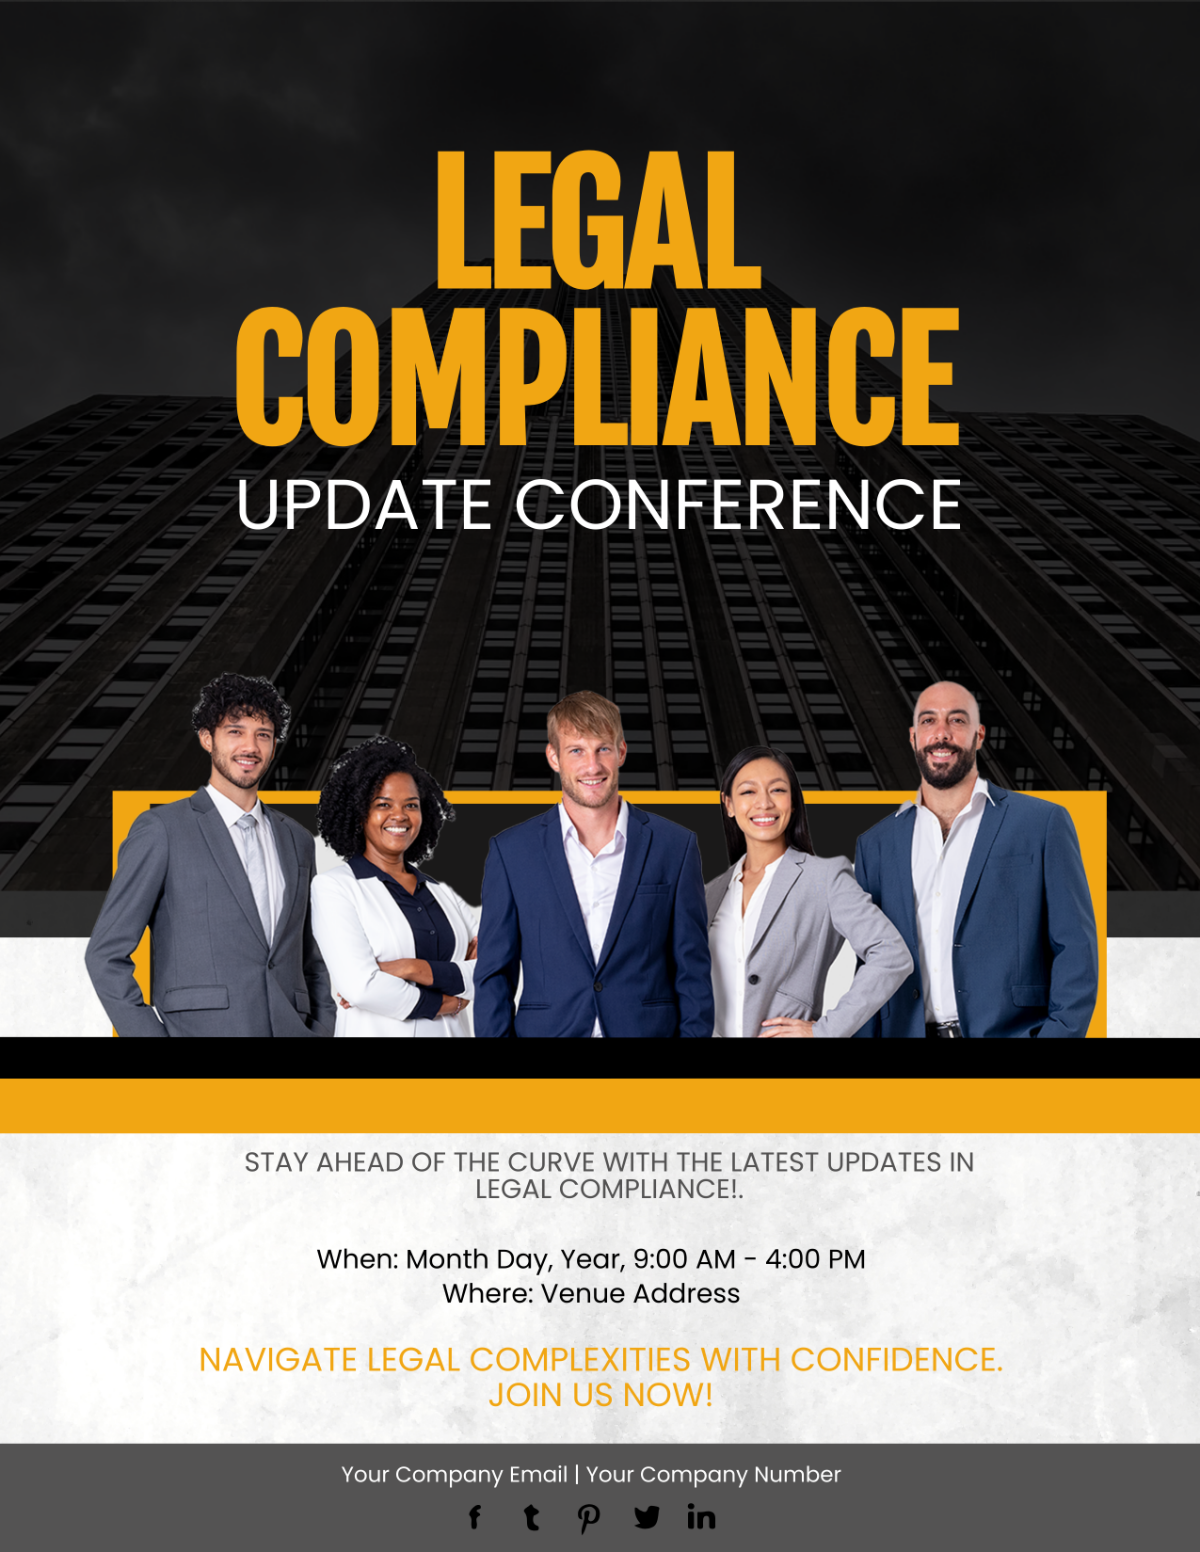 Legal Compliance Update Conference Flyer